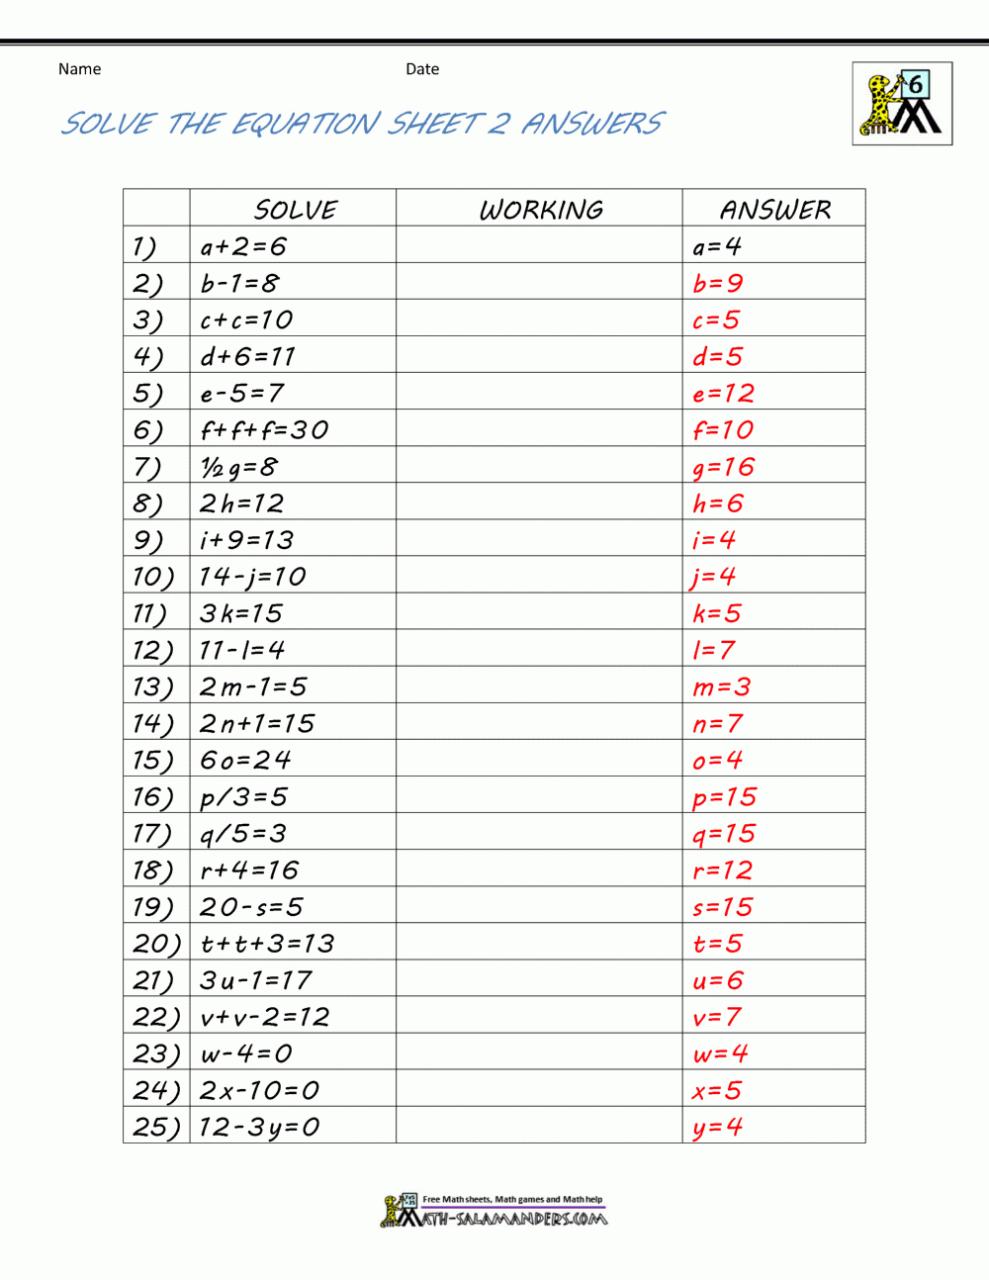 Free Worksheets For Linear Equations (Grades 69, PreAlgebra Free